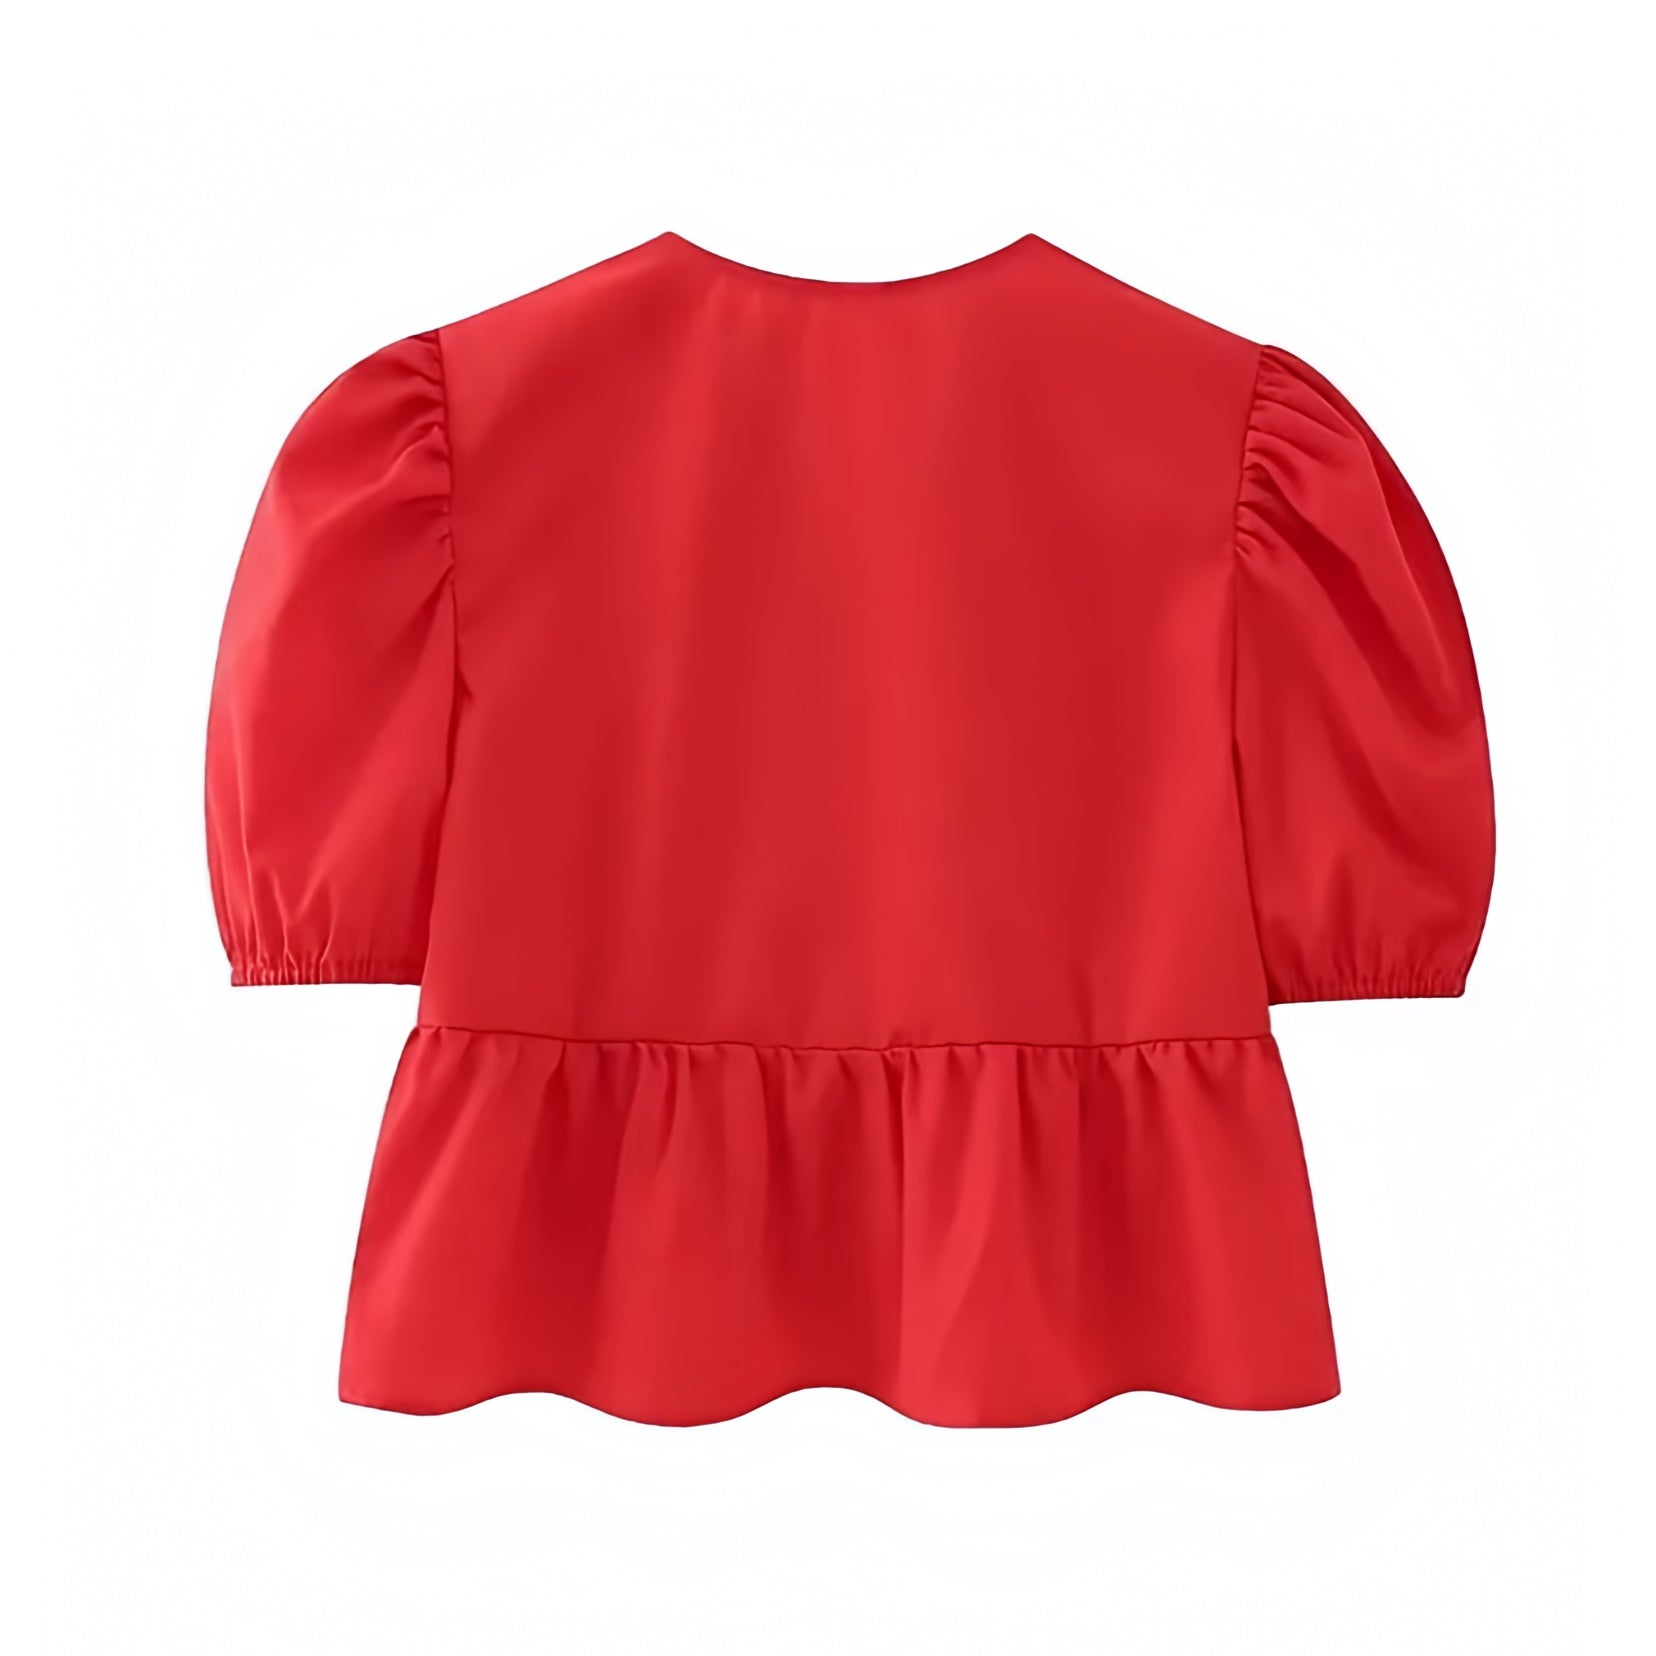 cherry-bright-red-bow-lace-up-round-neck-cut-out-ruffled-short-puff-sleeve-loose-fit-oversized-linen-crop-camisole-top-blouse-t-shirt-baby-tee-women-ladies-chic-trendy-spring-2024-summer-elegant-casual-feminine-preppy-style-coquette-dollette-zara-revolve-aritzia-urban-outfitters-brandy-melville-pacsun-garage-altard-state